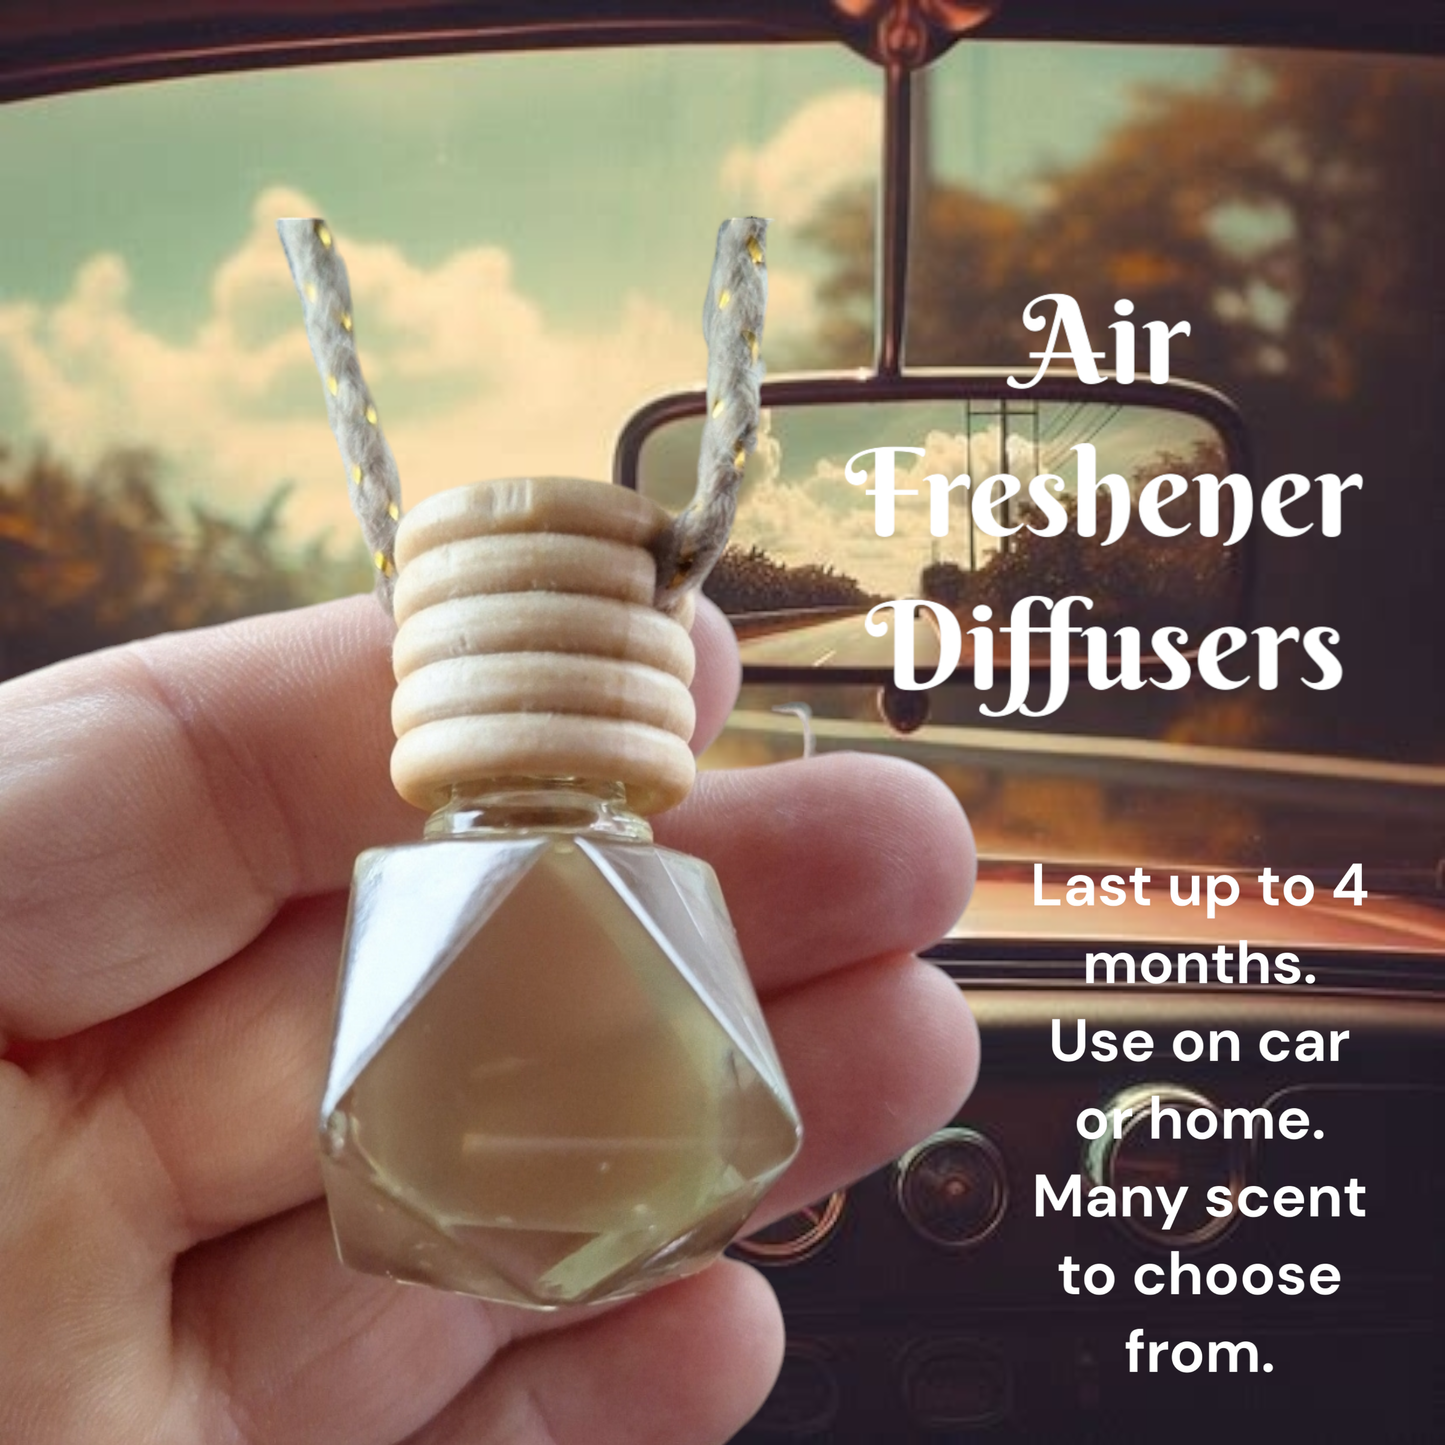 Cran Apple Pie Air Freshener Diffuser for your car or home.